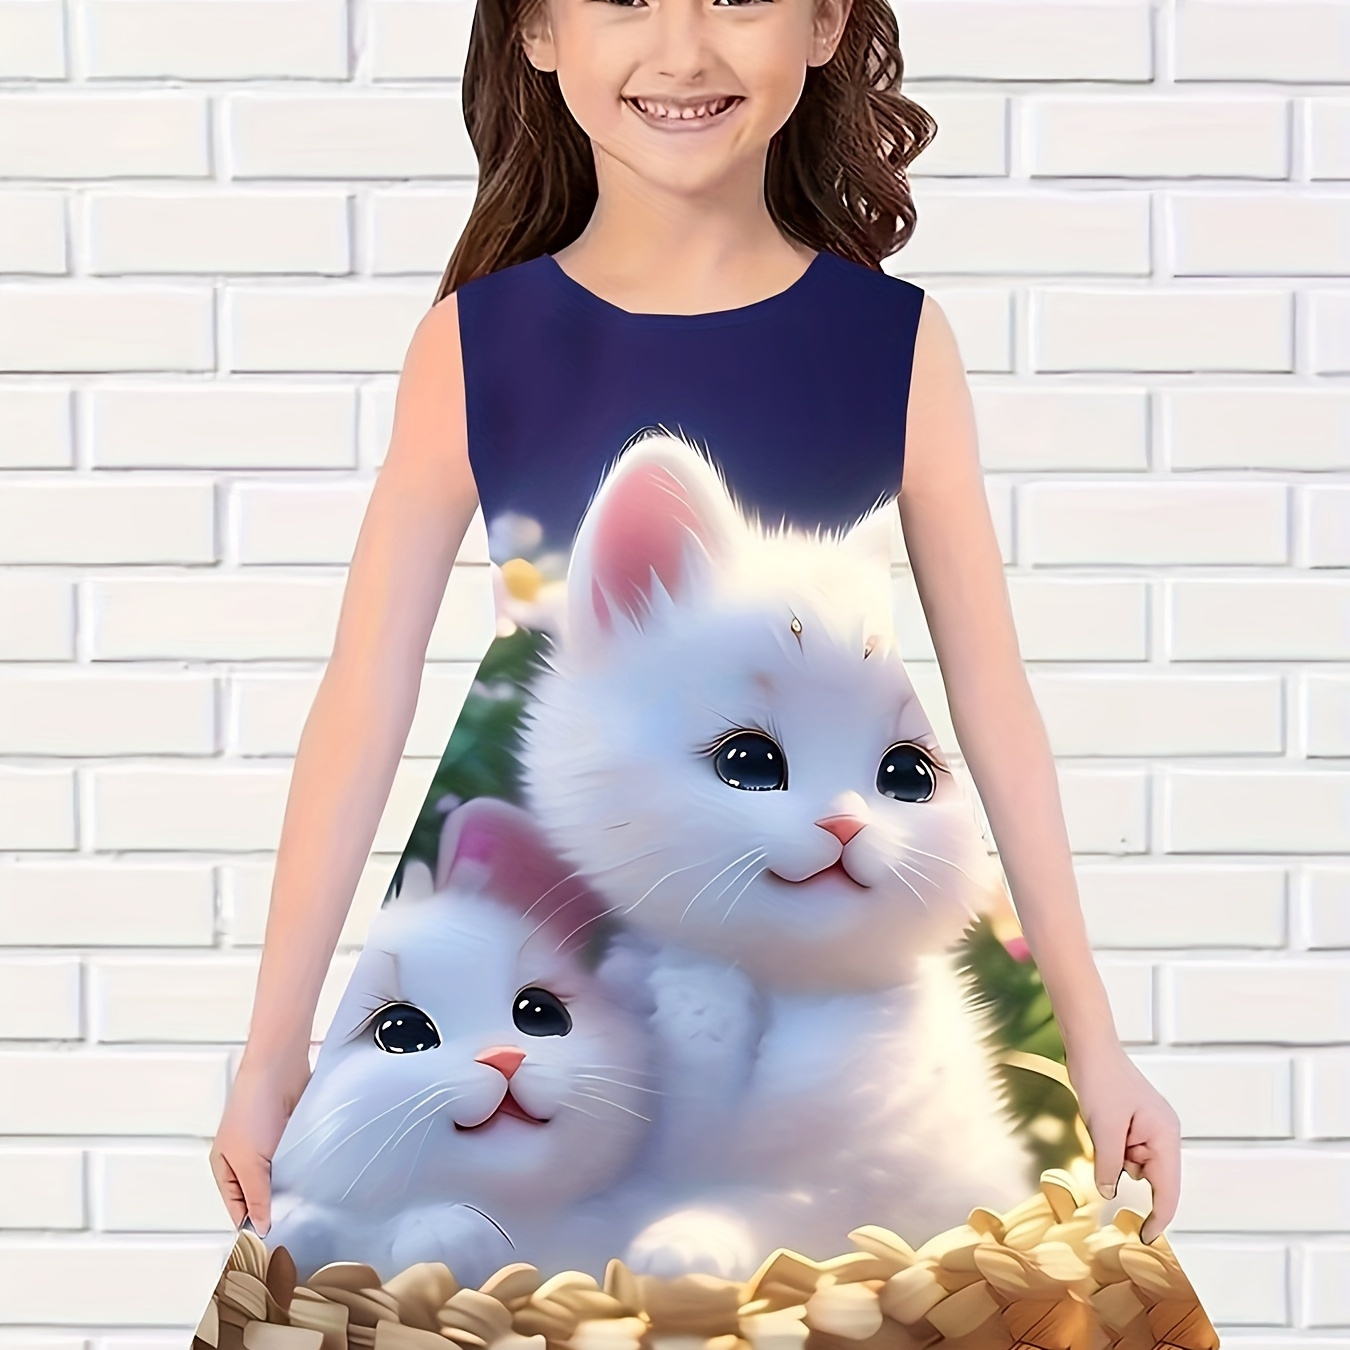 

Girls Cute Kitty Graphic Sleeveless Dress For Summer Party Gift